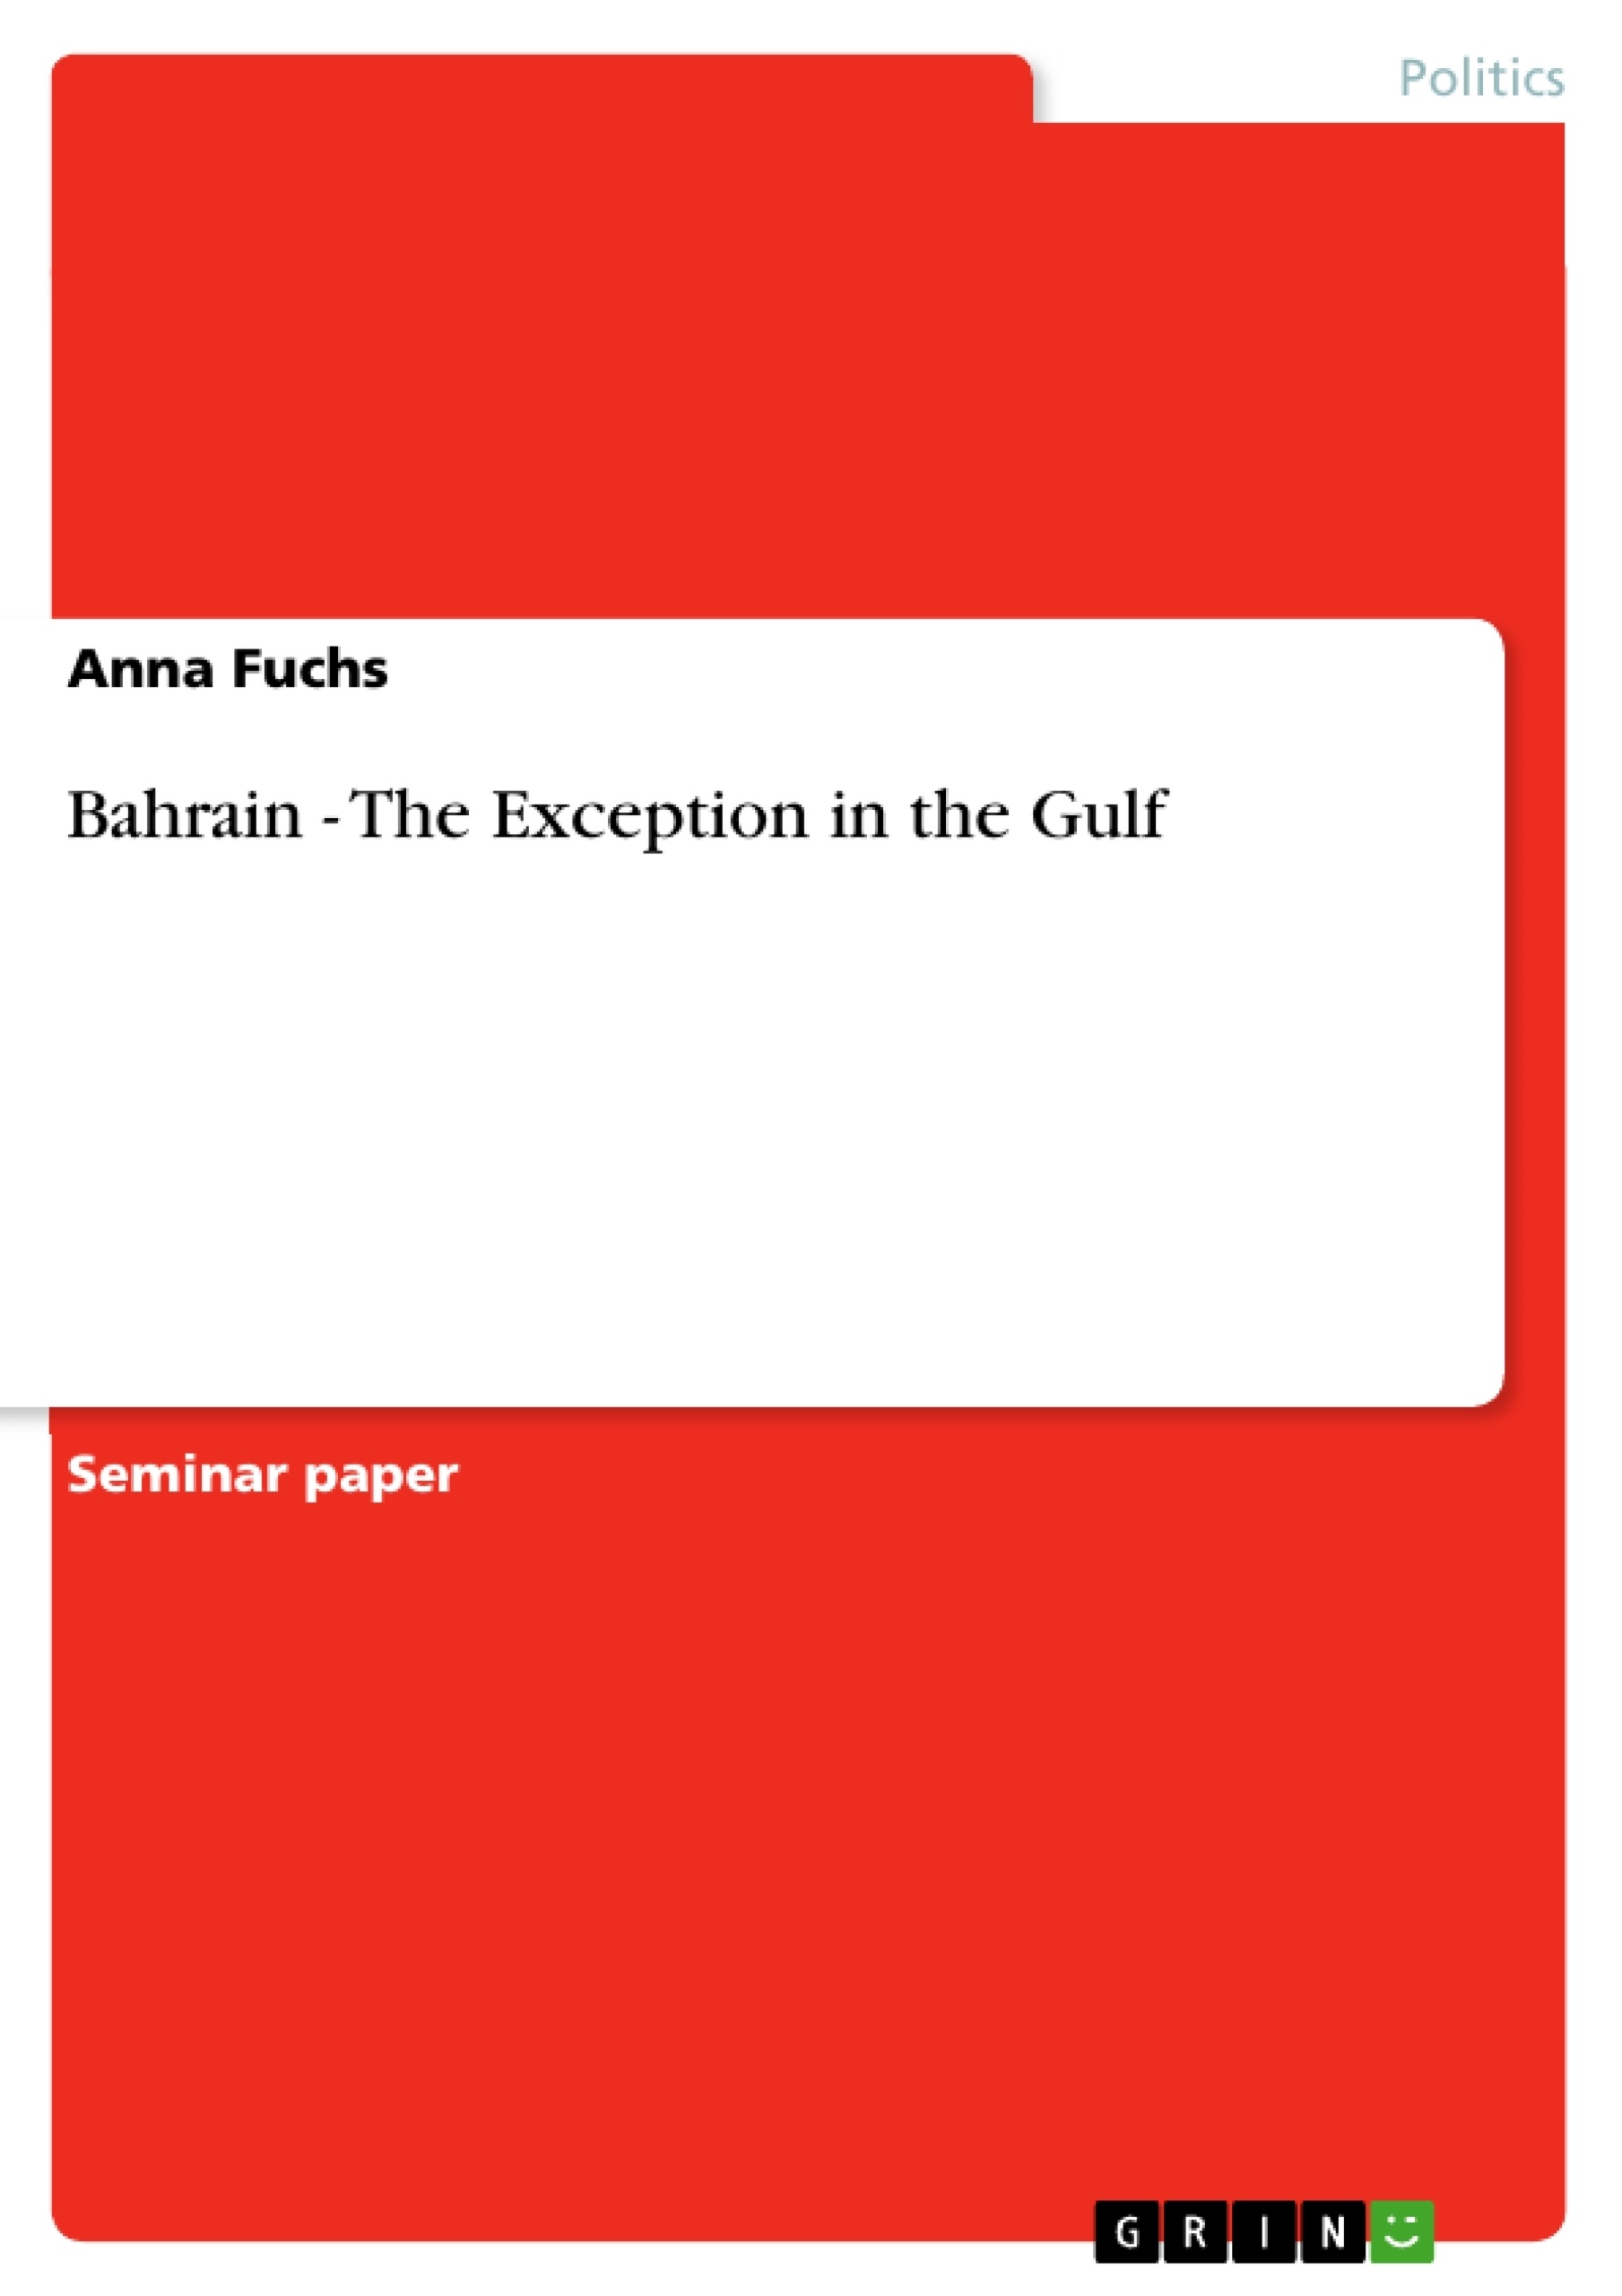 Titel: Bahrain - The Exception in the Gulf